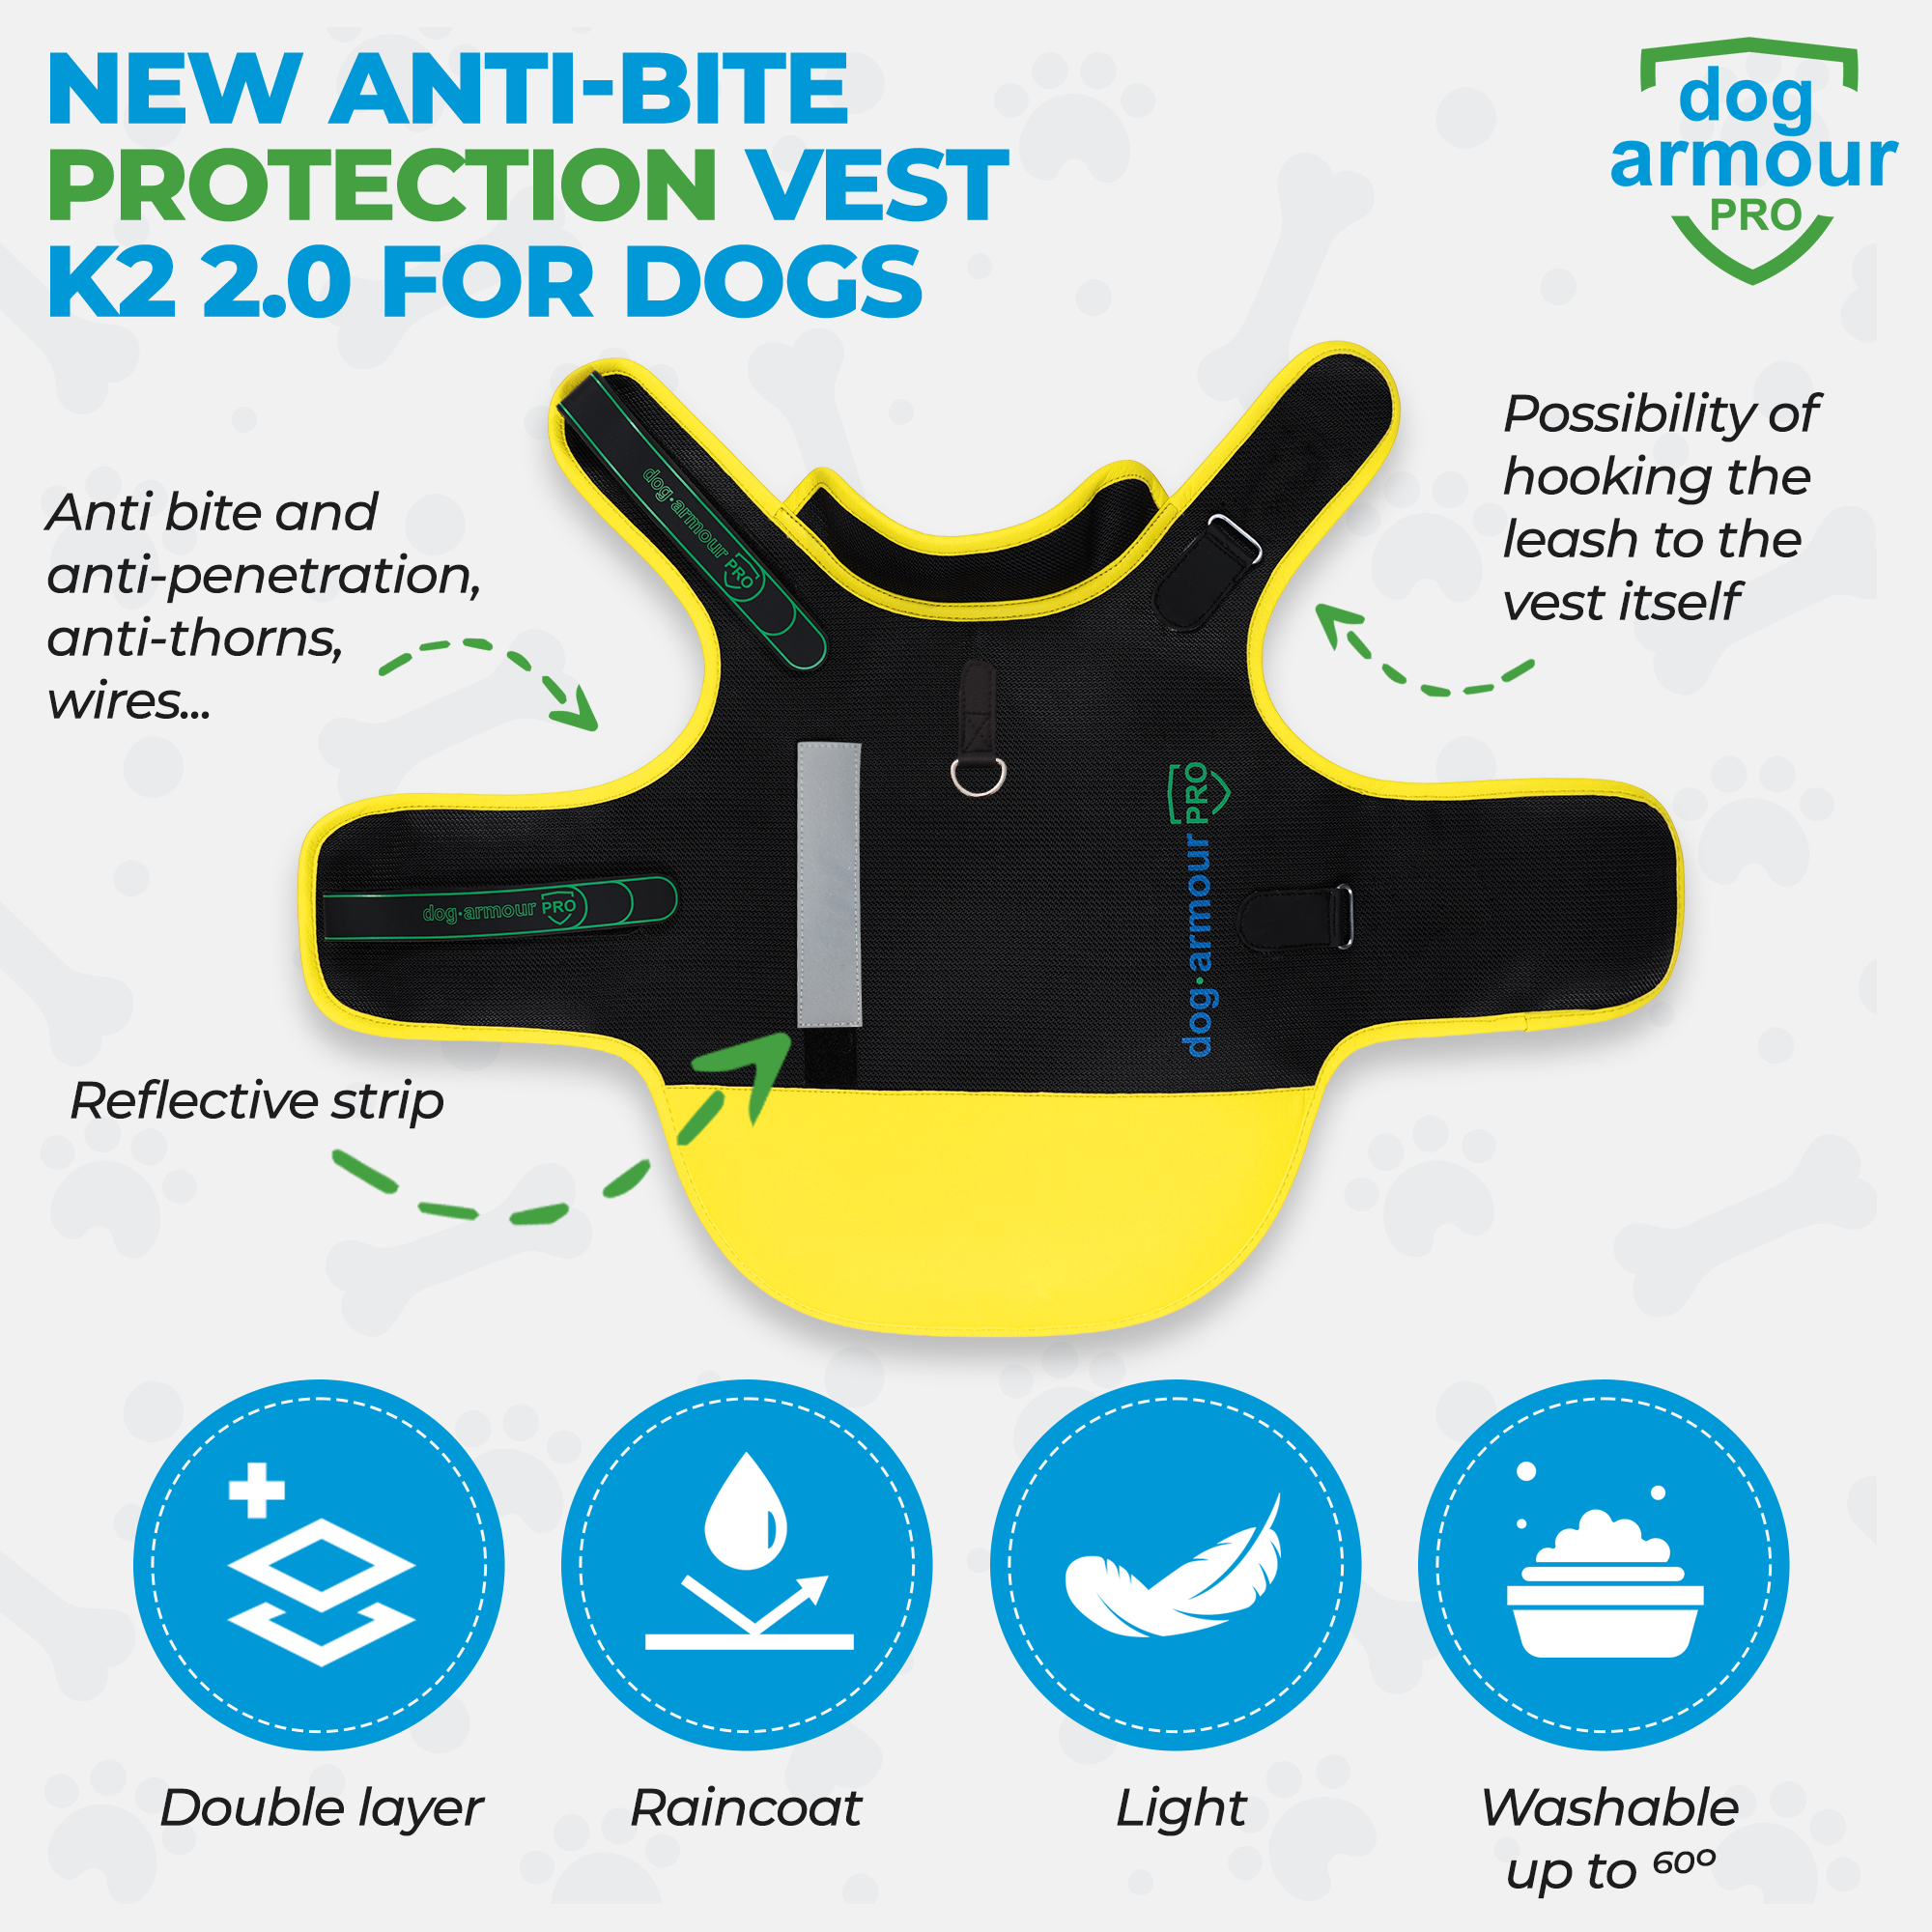 dog armour PRO - Sleeve and leg protections